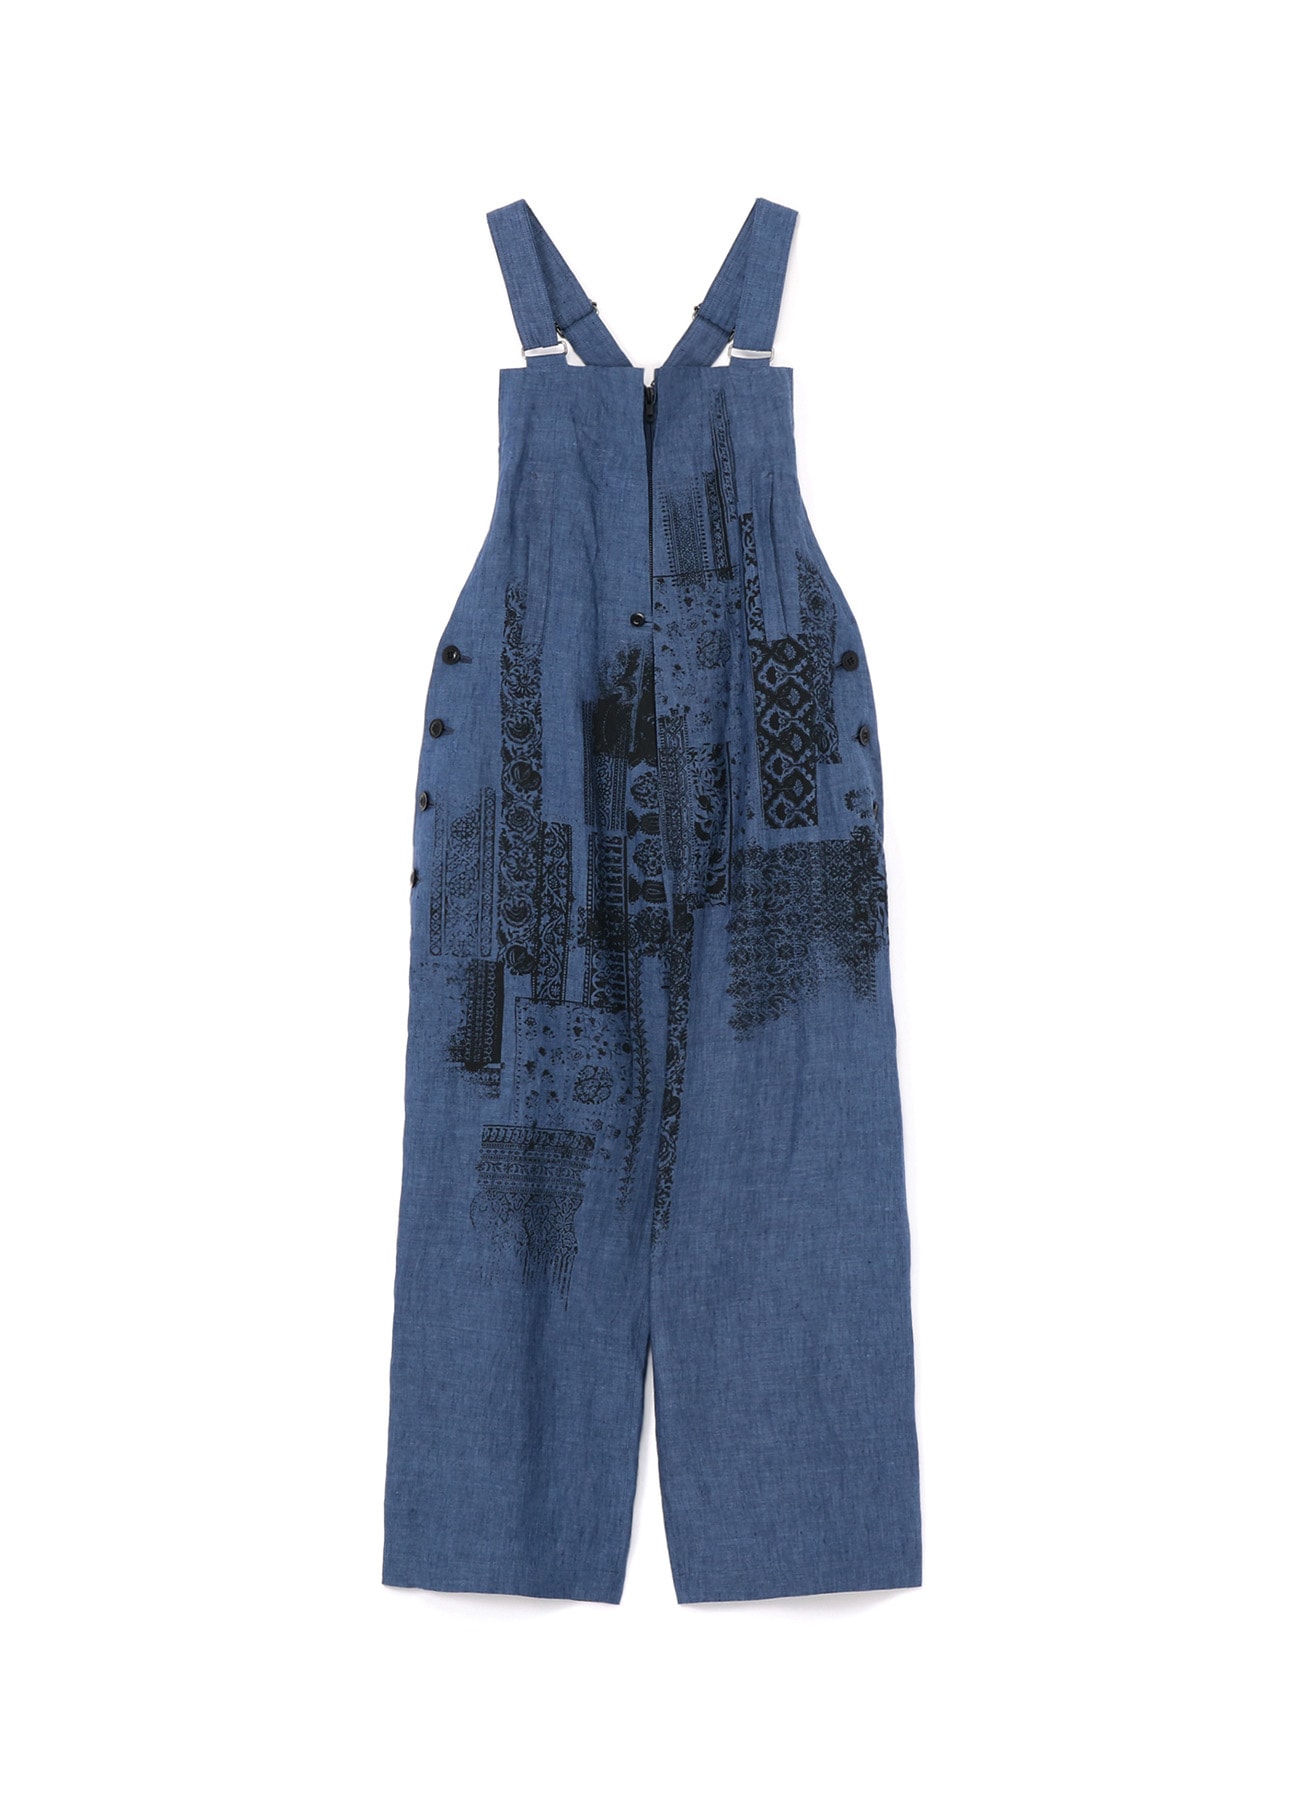 LINEN CHAMBRAY ETHNIC PATCHWORK PRINT OVERALLS(XS Light Blue): Y's ...